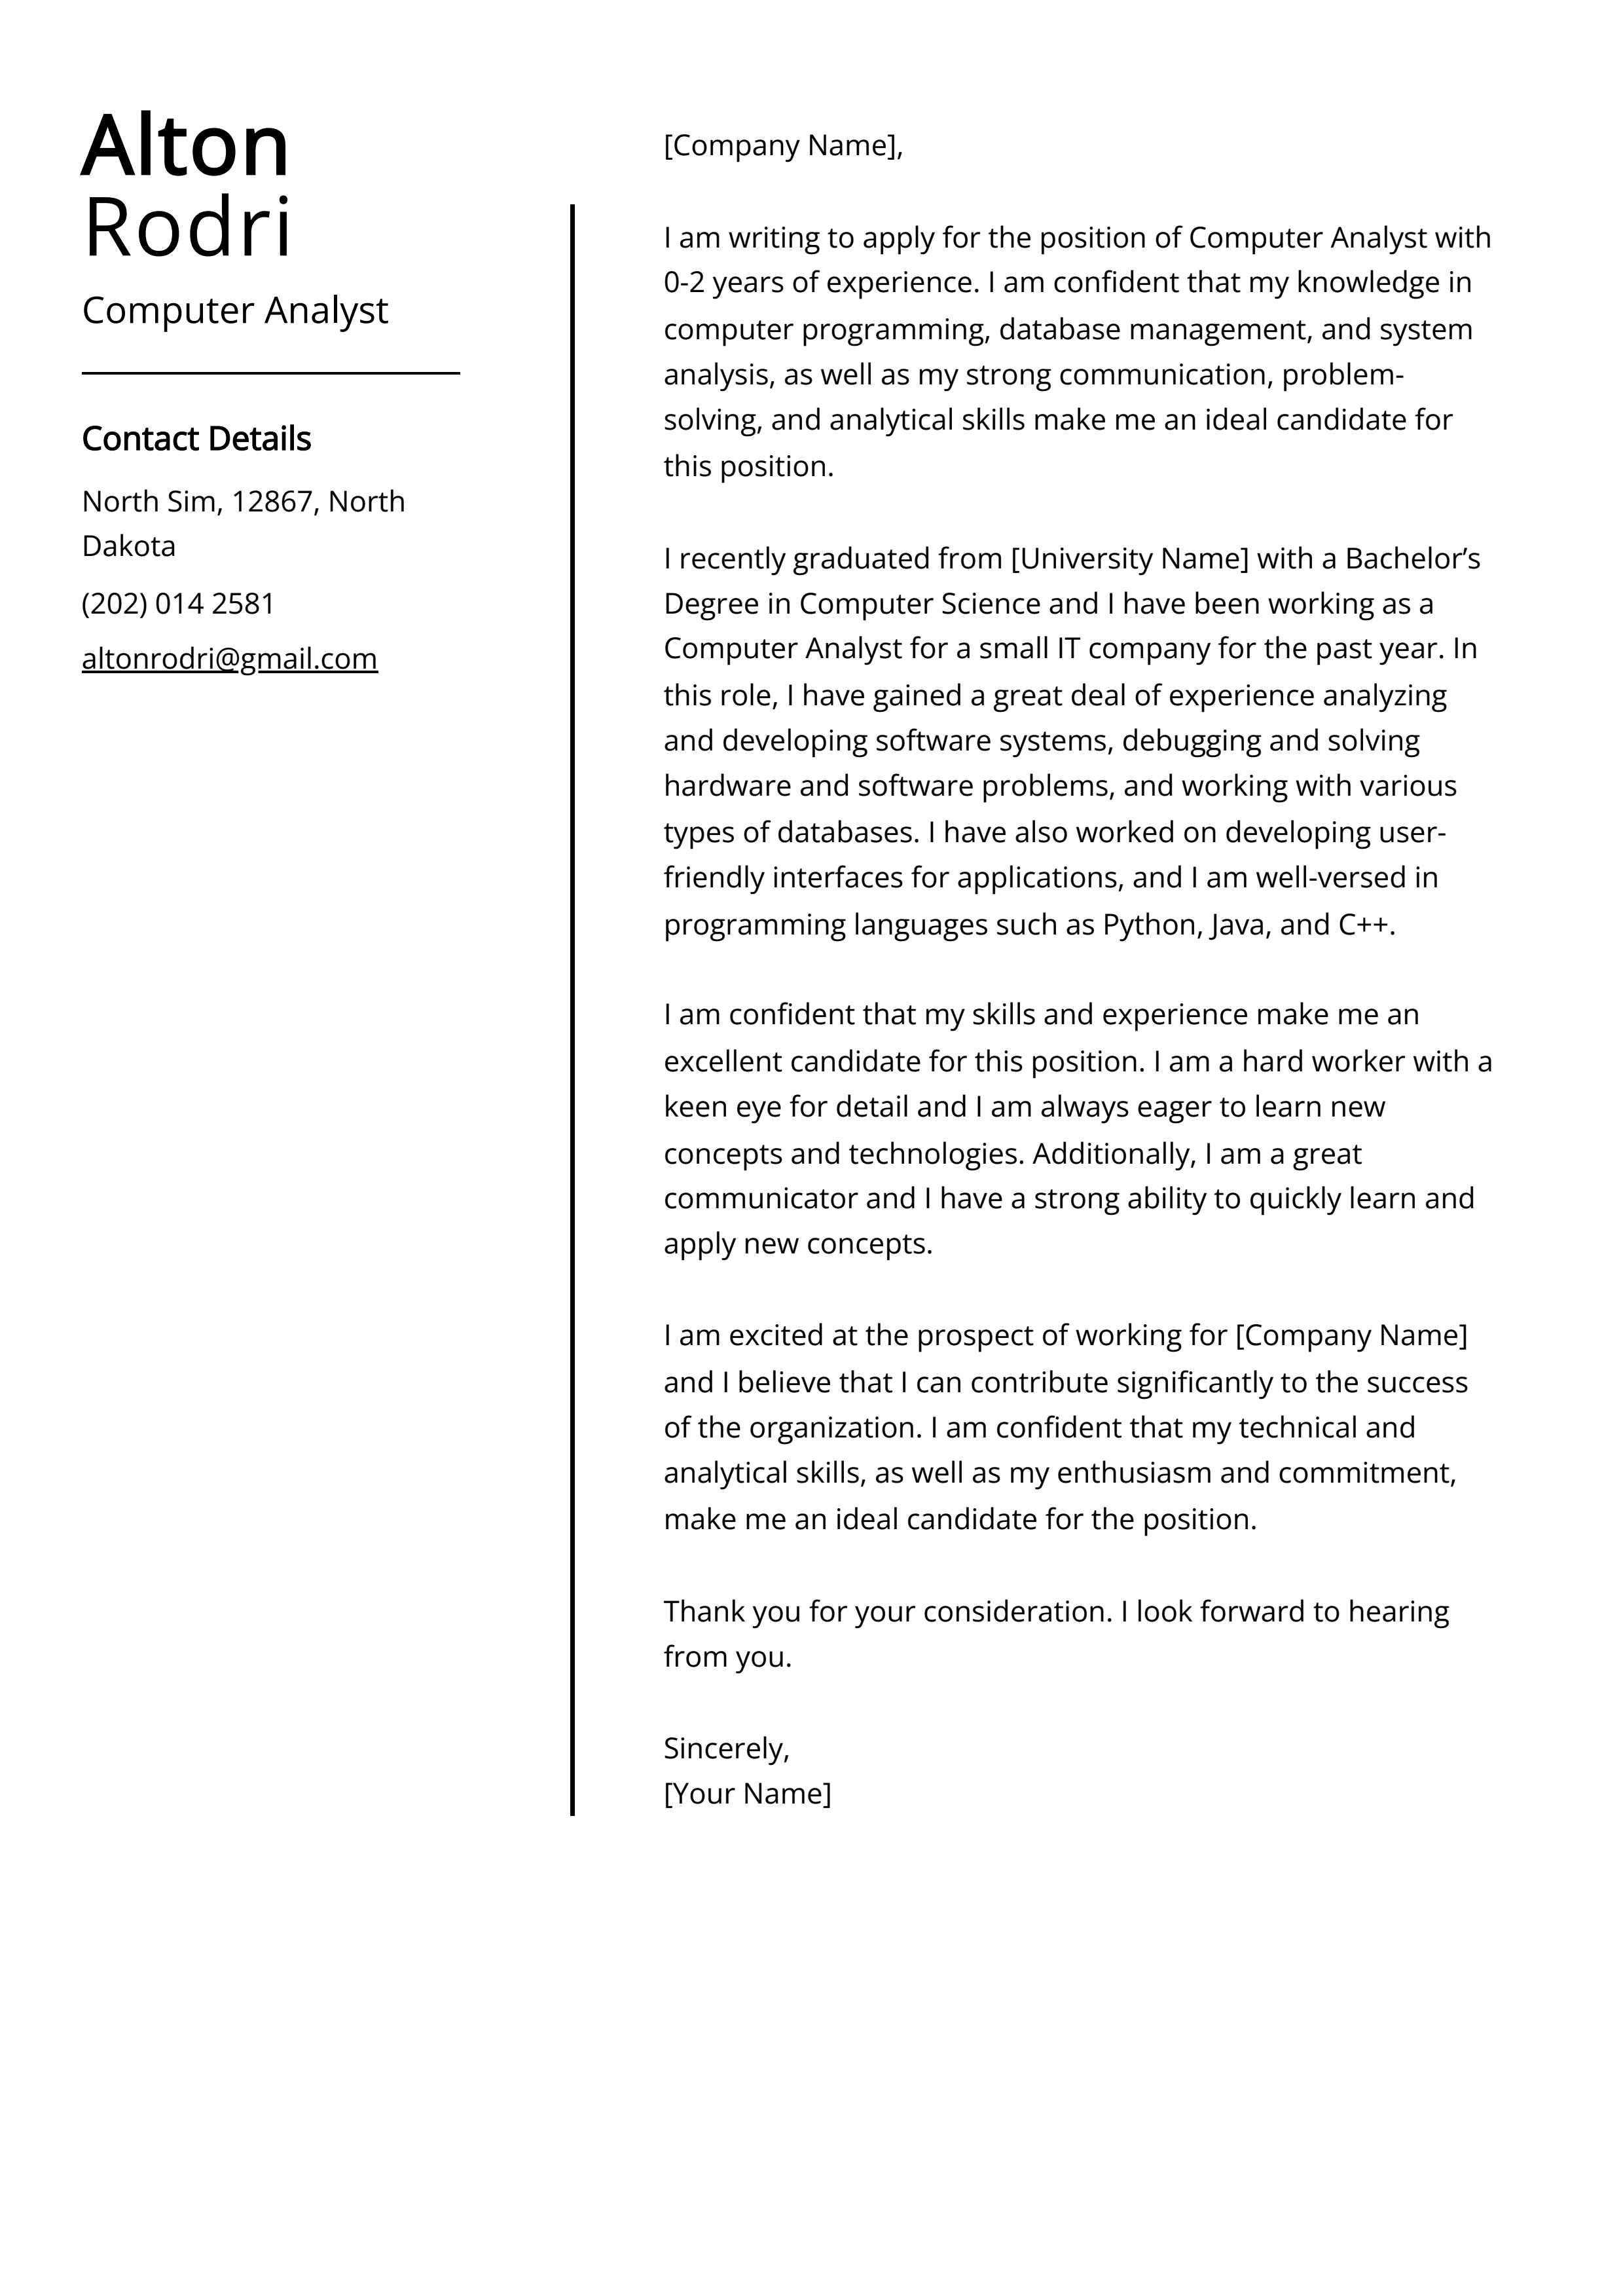 Computer Analyst Cover Letter Example